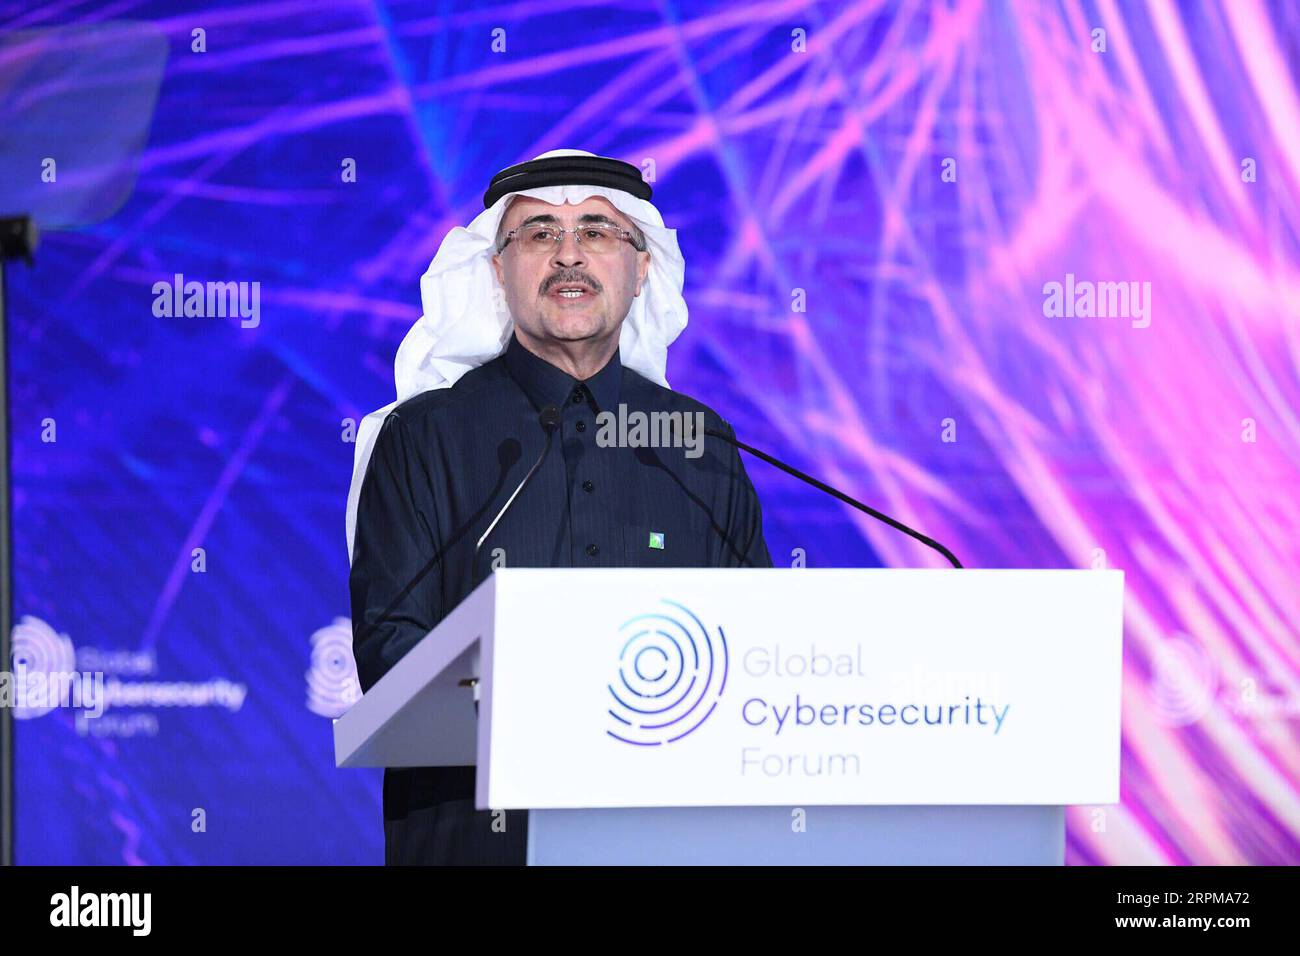 200205 -- RIYADH, Feb. 5, 2020 Xinhua -- Aramco President and CEO Amin Nasser speaks at the Global Cybersecurity Forum in Riyadh, Saudi Arabia, Feb. 4, 2020. Saudi Arabia s oil giant Aramco on Tuesday emphasized the constantly-evolving threat of cyber-terrorism to governments, businesses and individuals, urging stronger cooperation in this sphere. Saudi Aramco/Handout via Xinhua SAUDI ARABIA-RIYADH-OIL GIANT-CYBERSECURITY COOPERATION PUBLICATIONxNOTxINxCHN Stock Photo